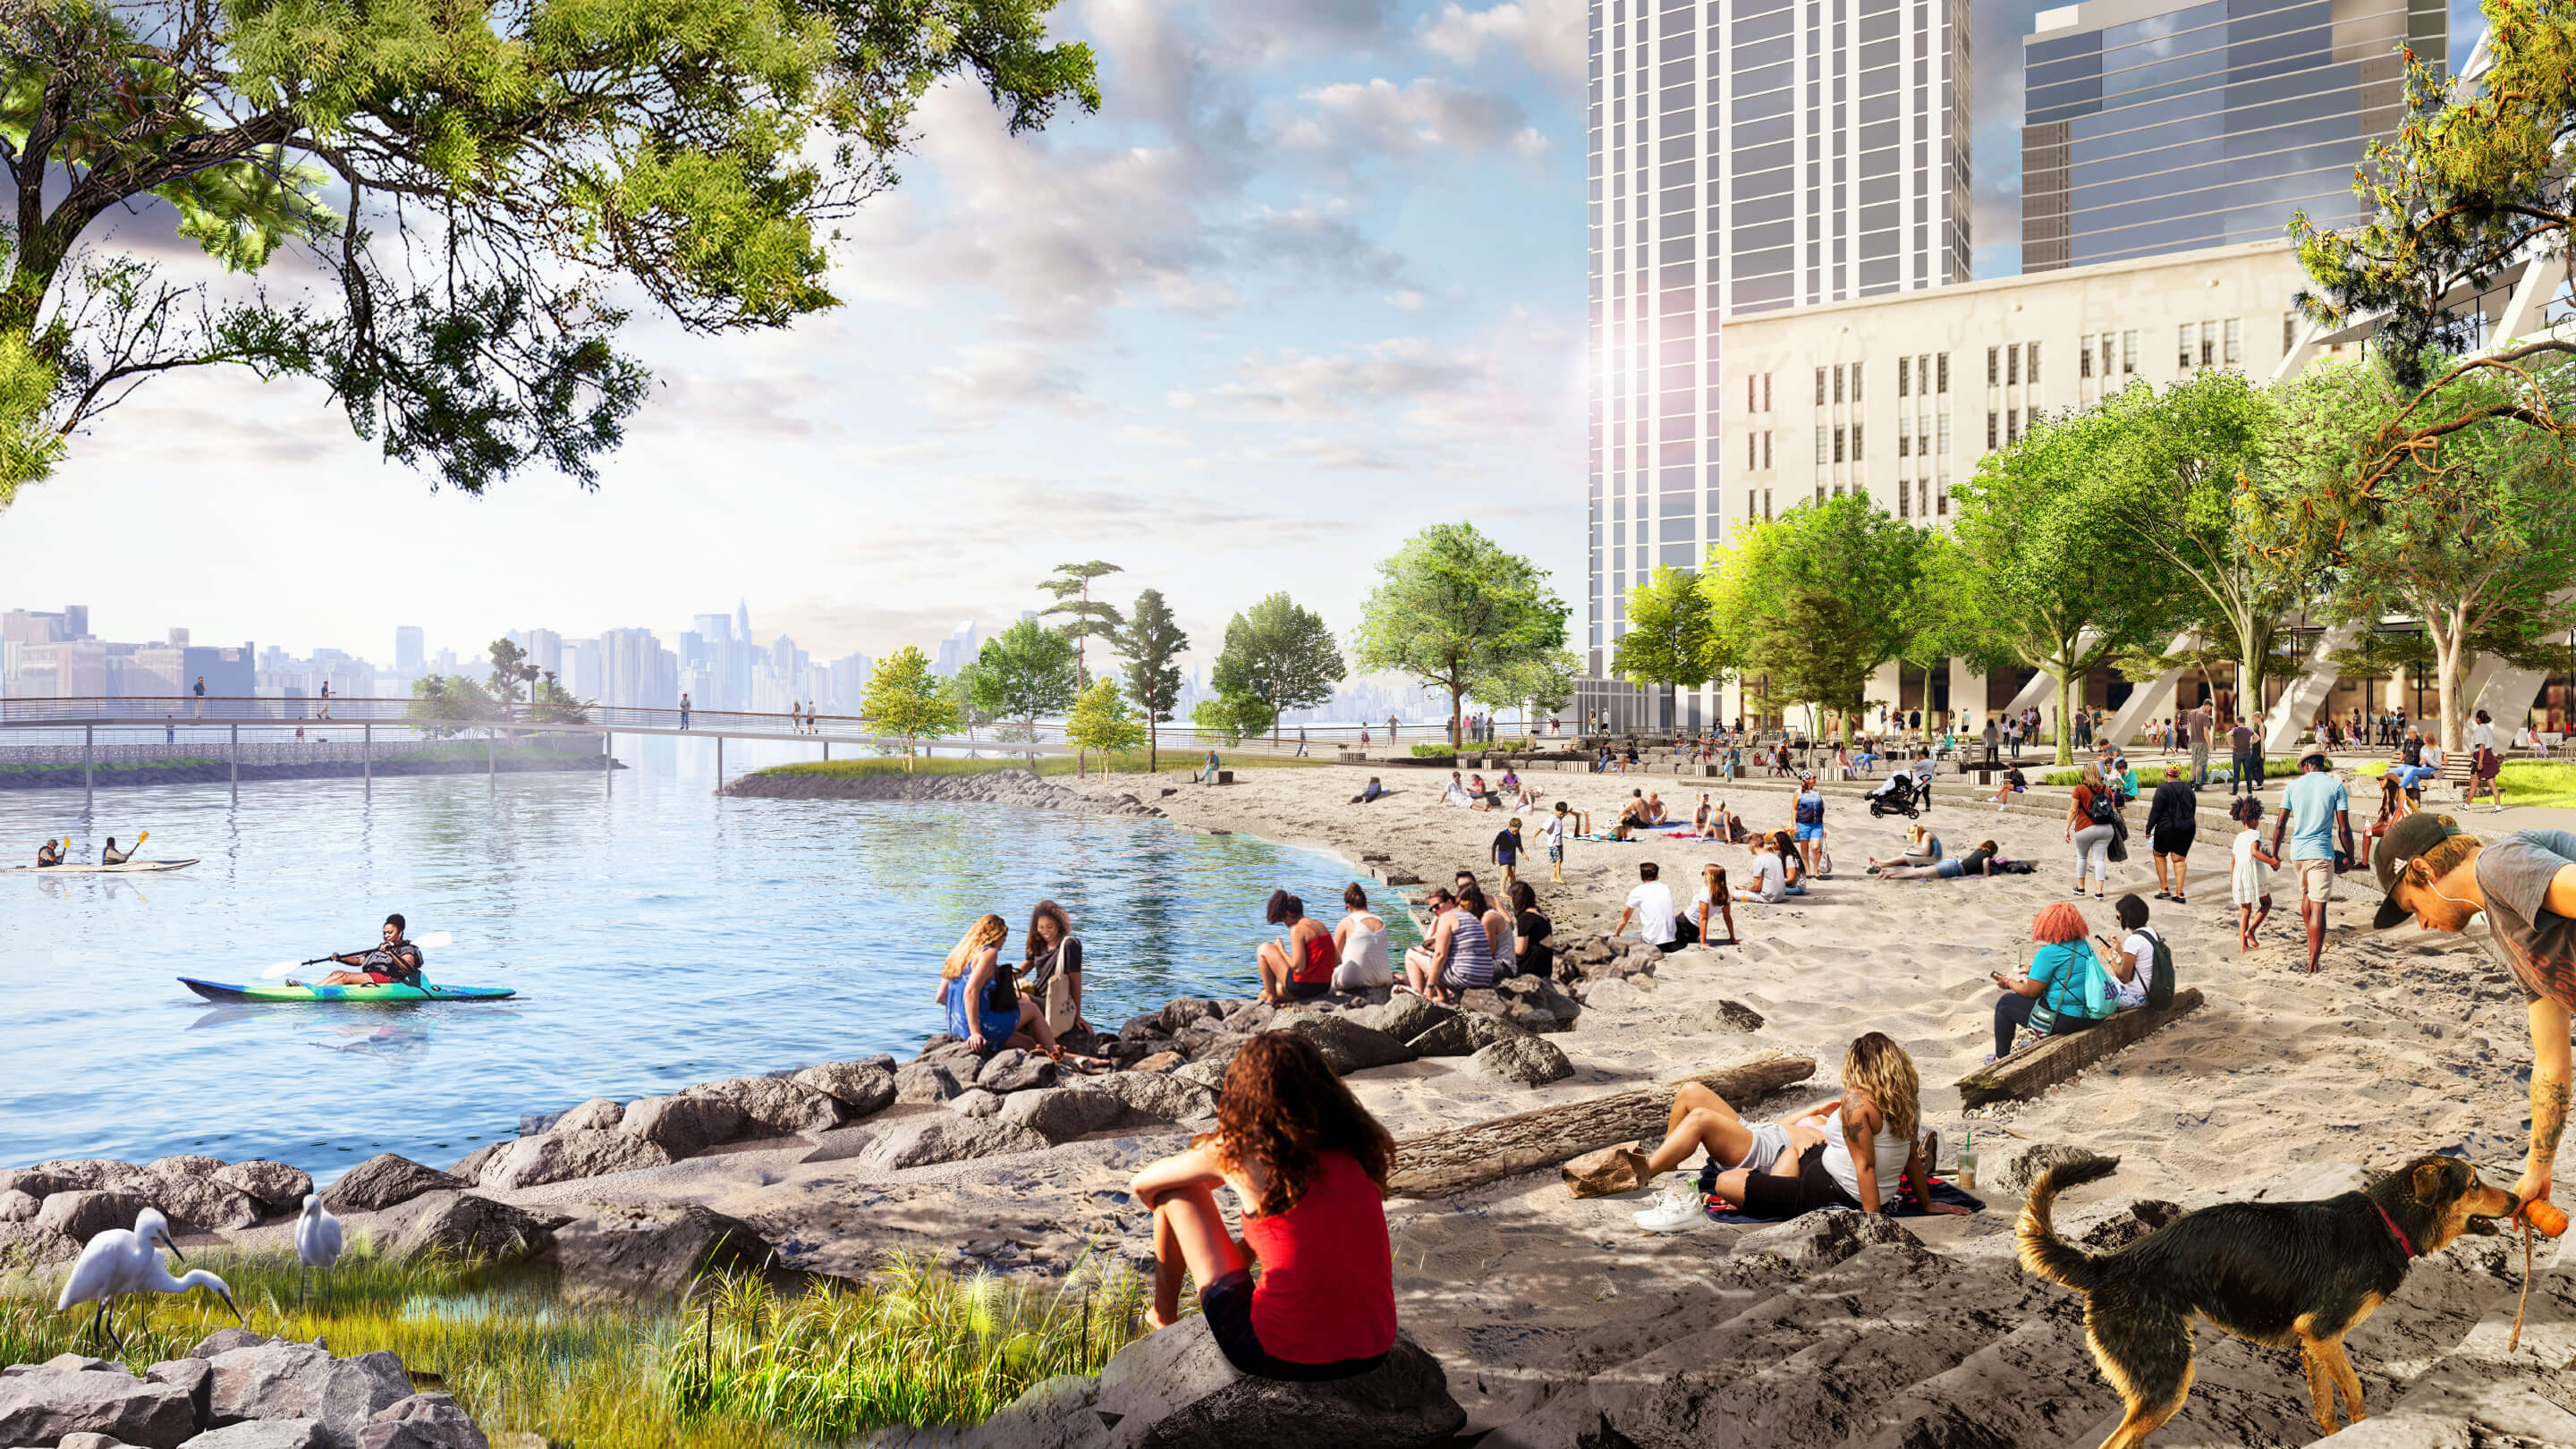 A public beach at river ring on the williamsburg waterfront